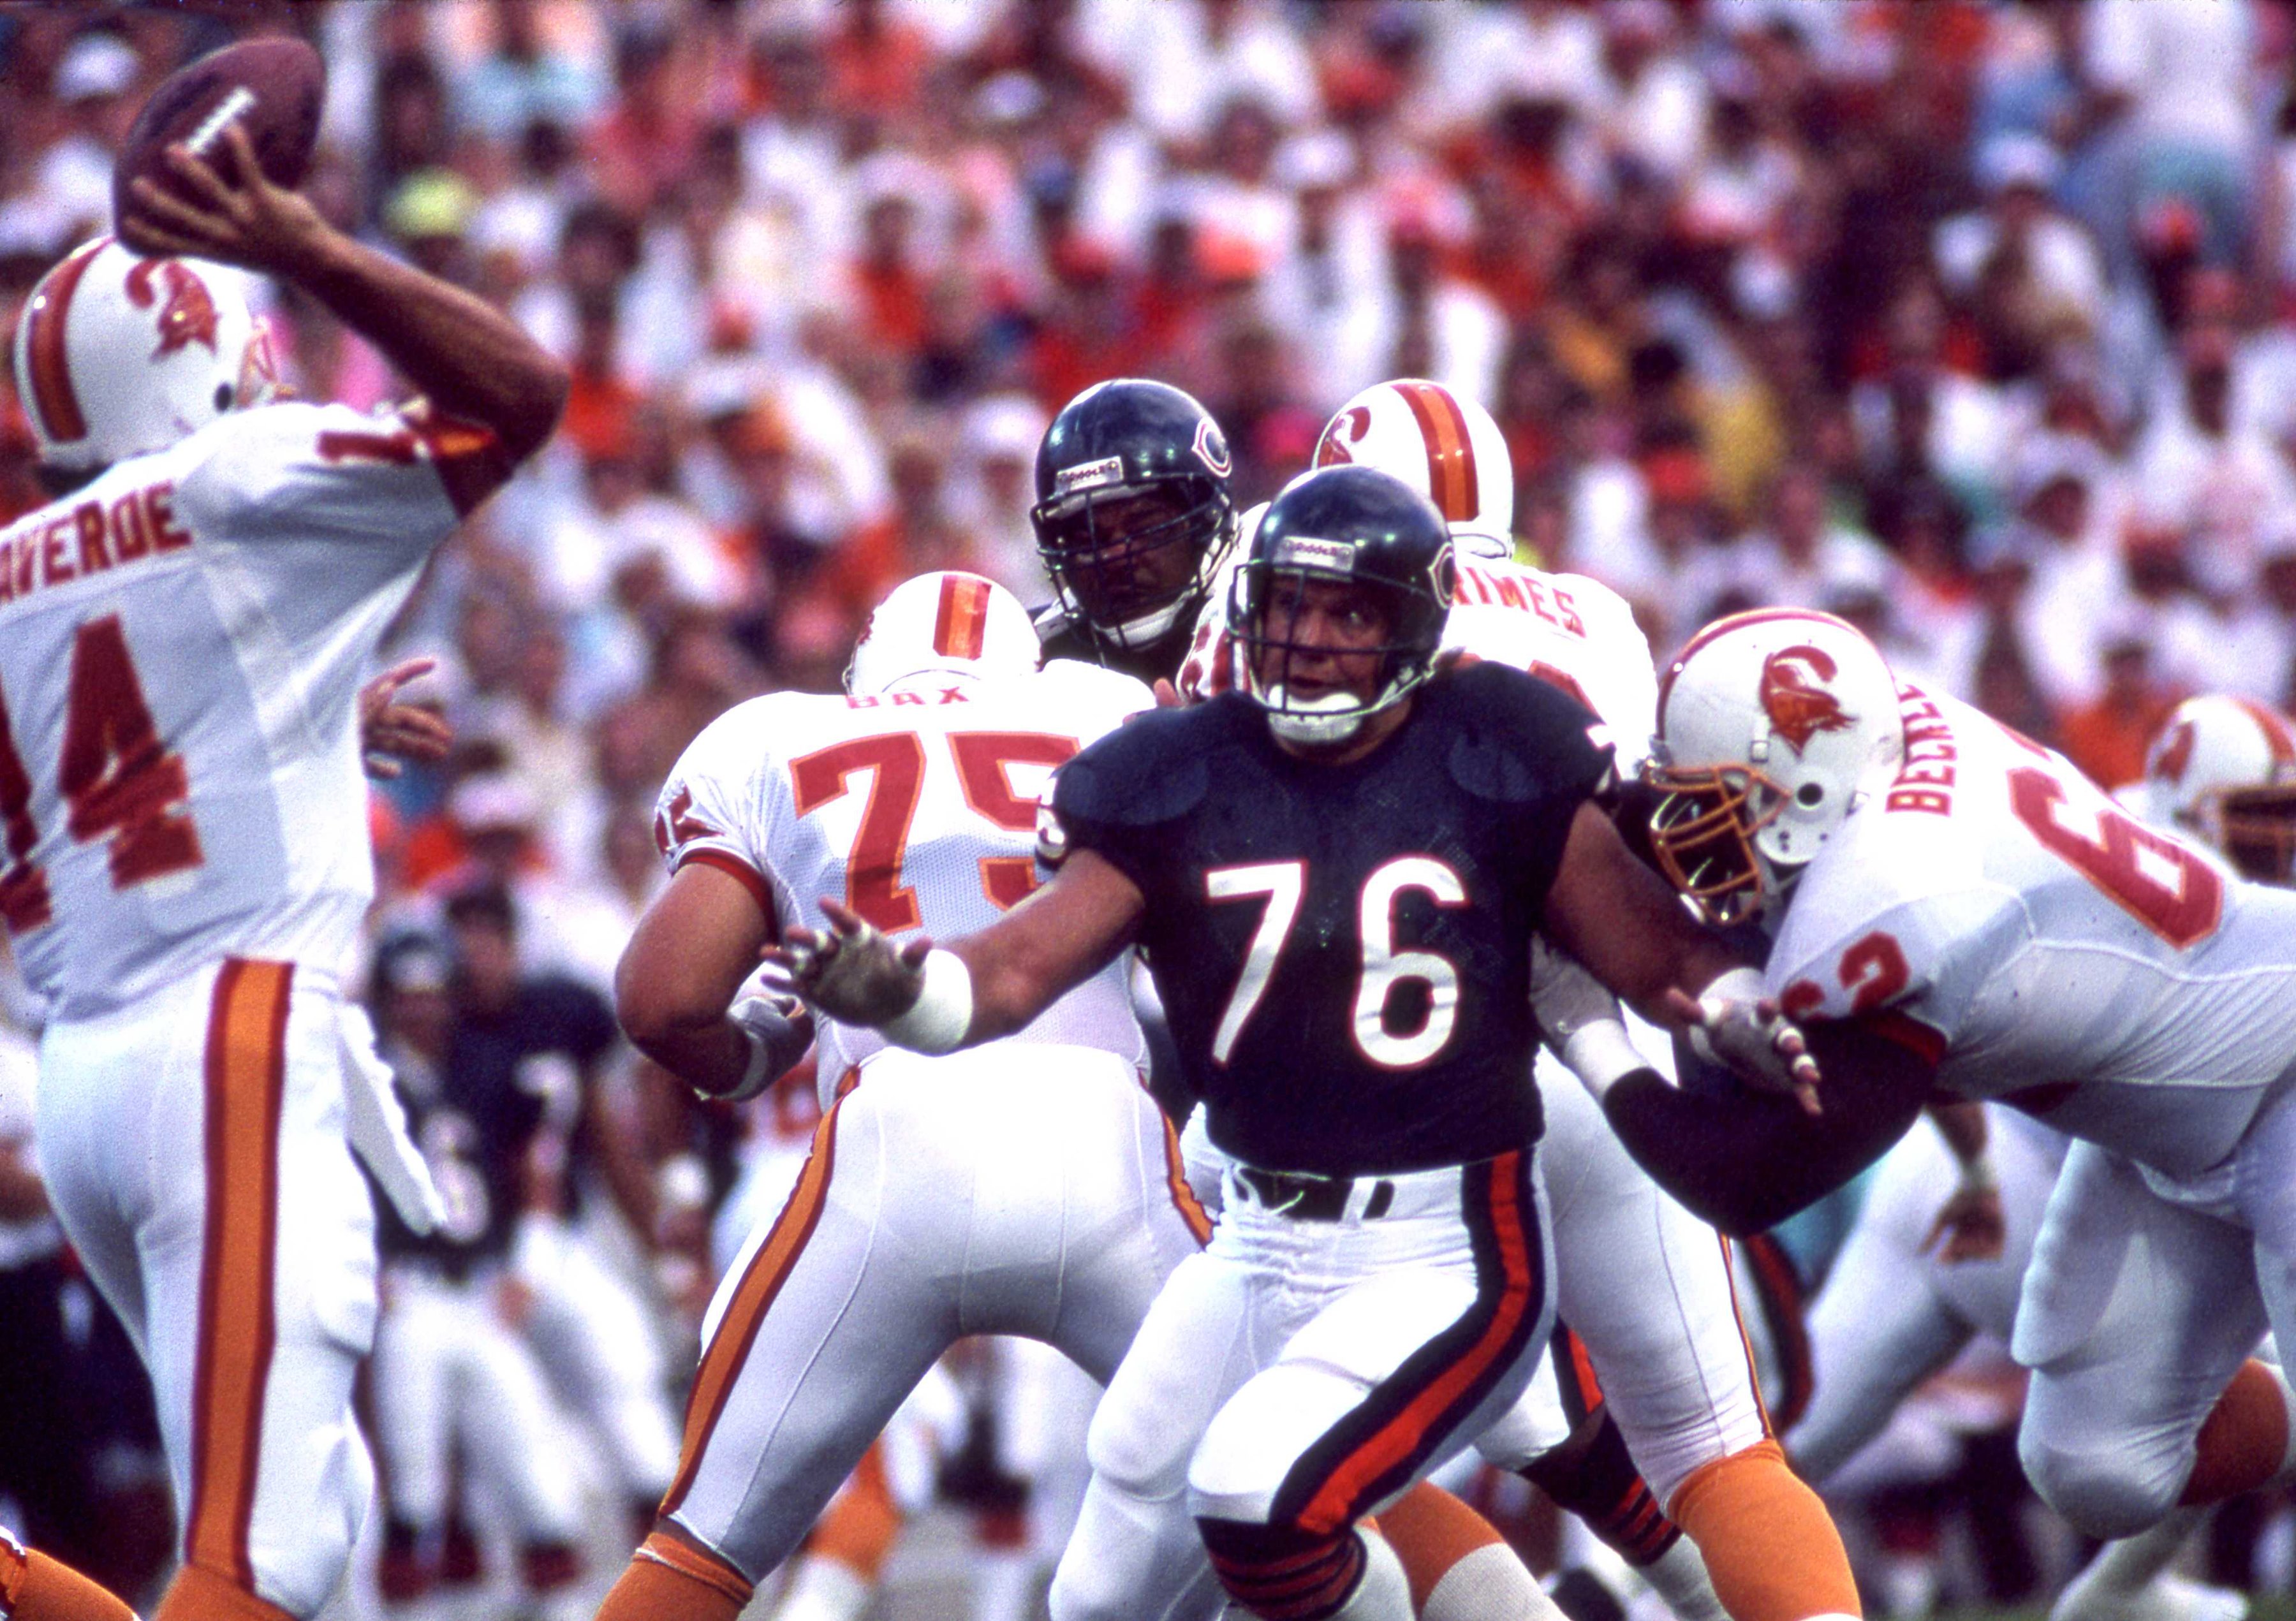 Defensive end Steve McMichael of the Chicago Bears gets past guard Ian Beckles of the Tampa Bay Buccaneers and tries to sack quarterback Vinny Testaverde.